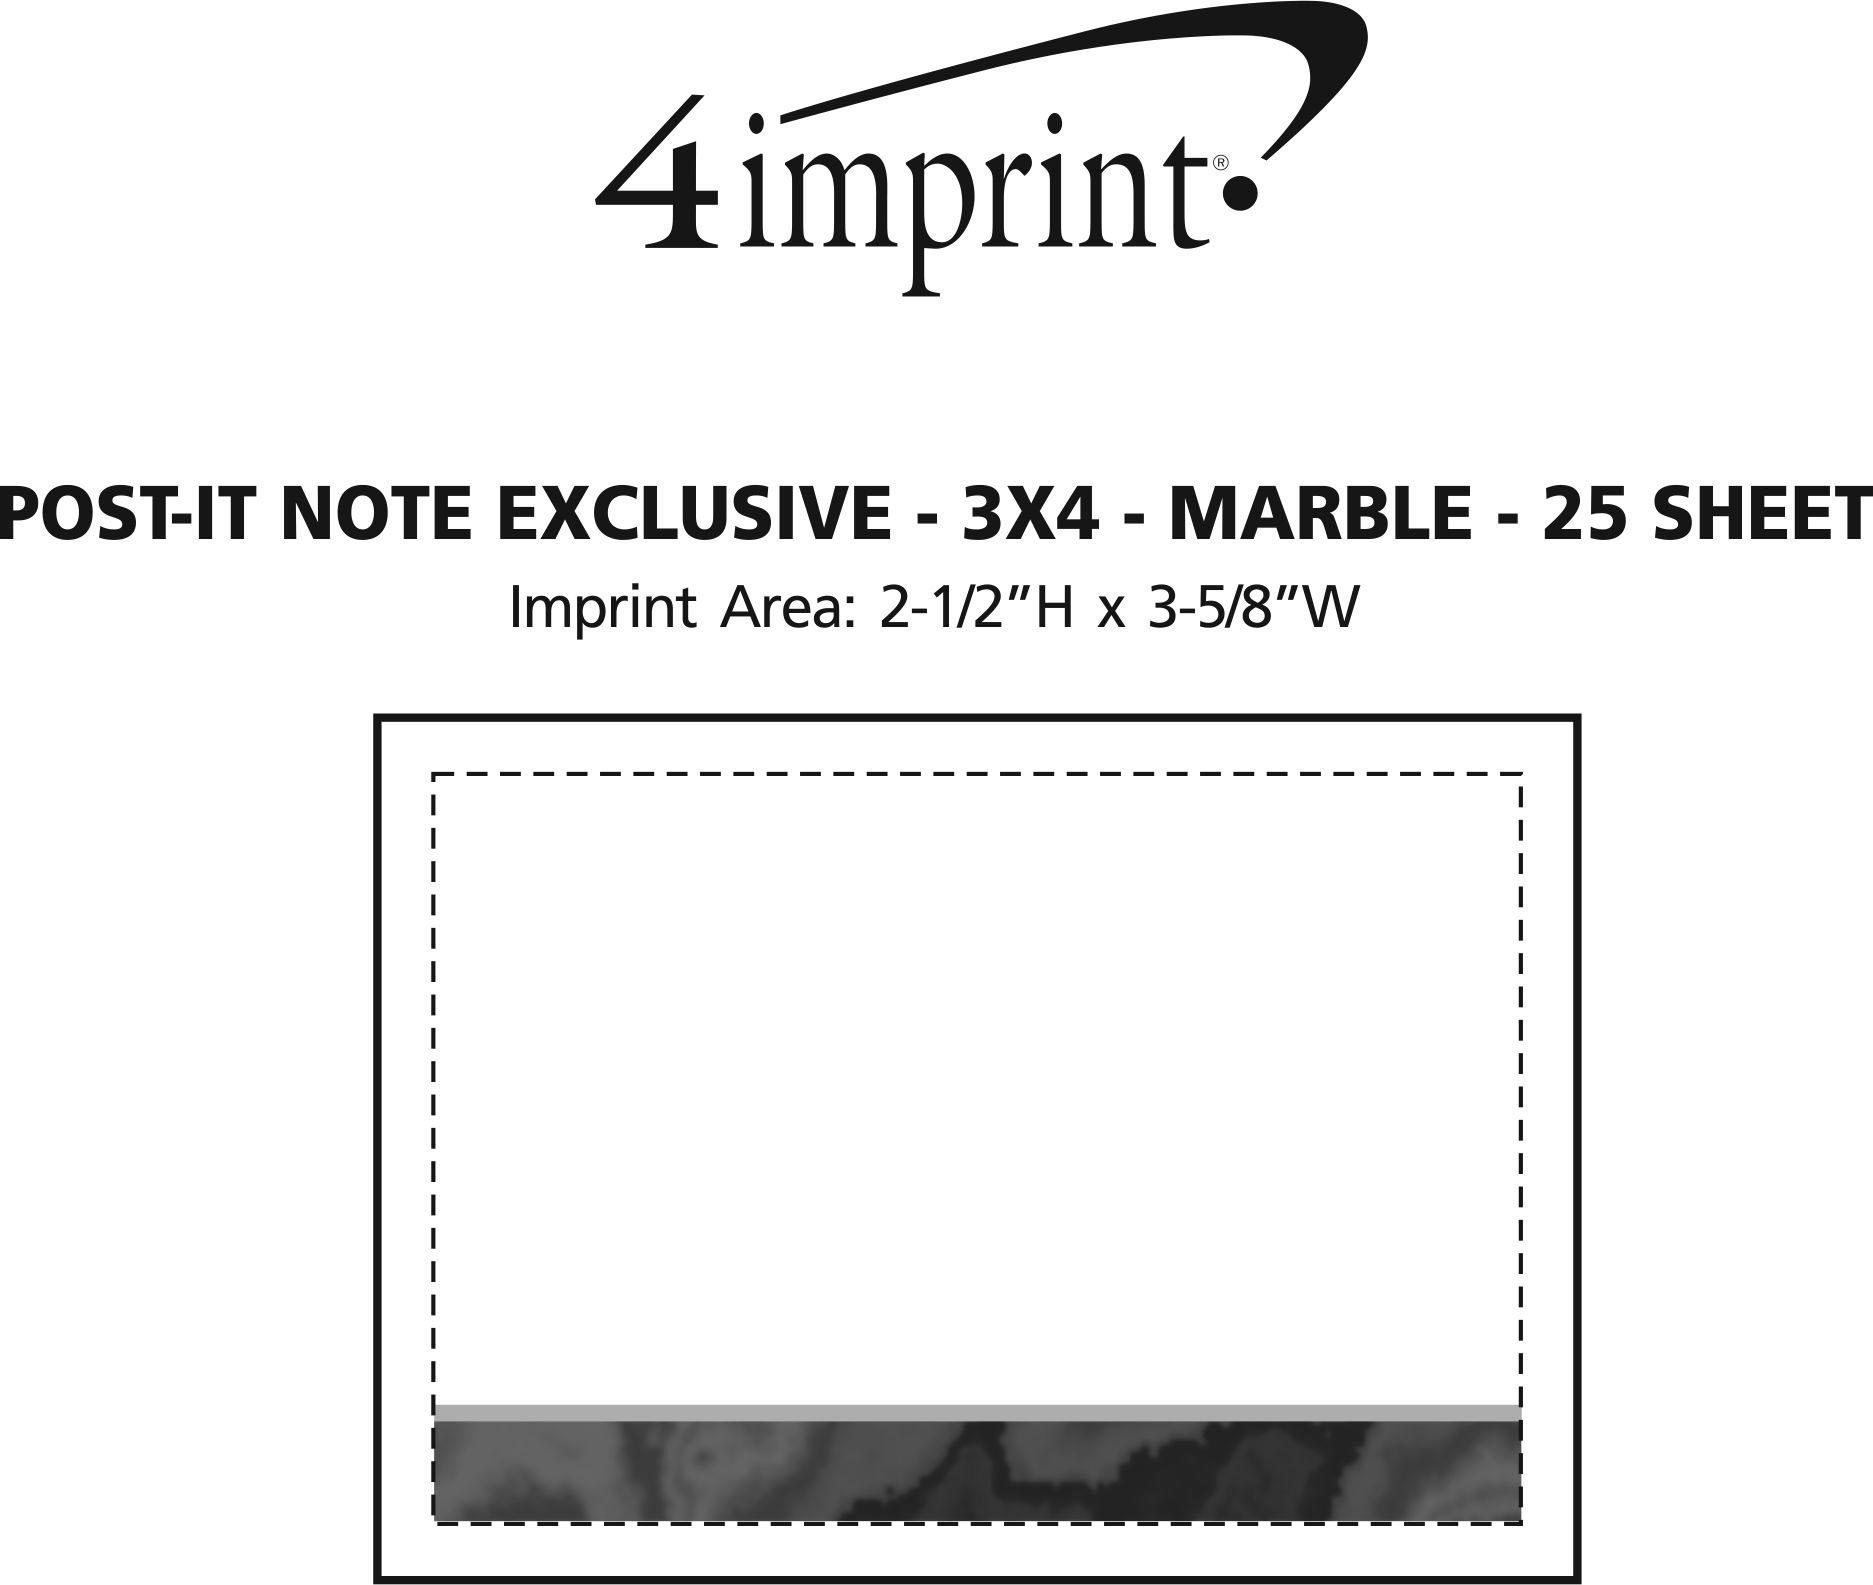 Imprint Area of Post-it® Notes - 3" x 4" - Exclusive - Marble - 25 Sheet